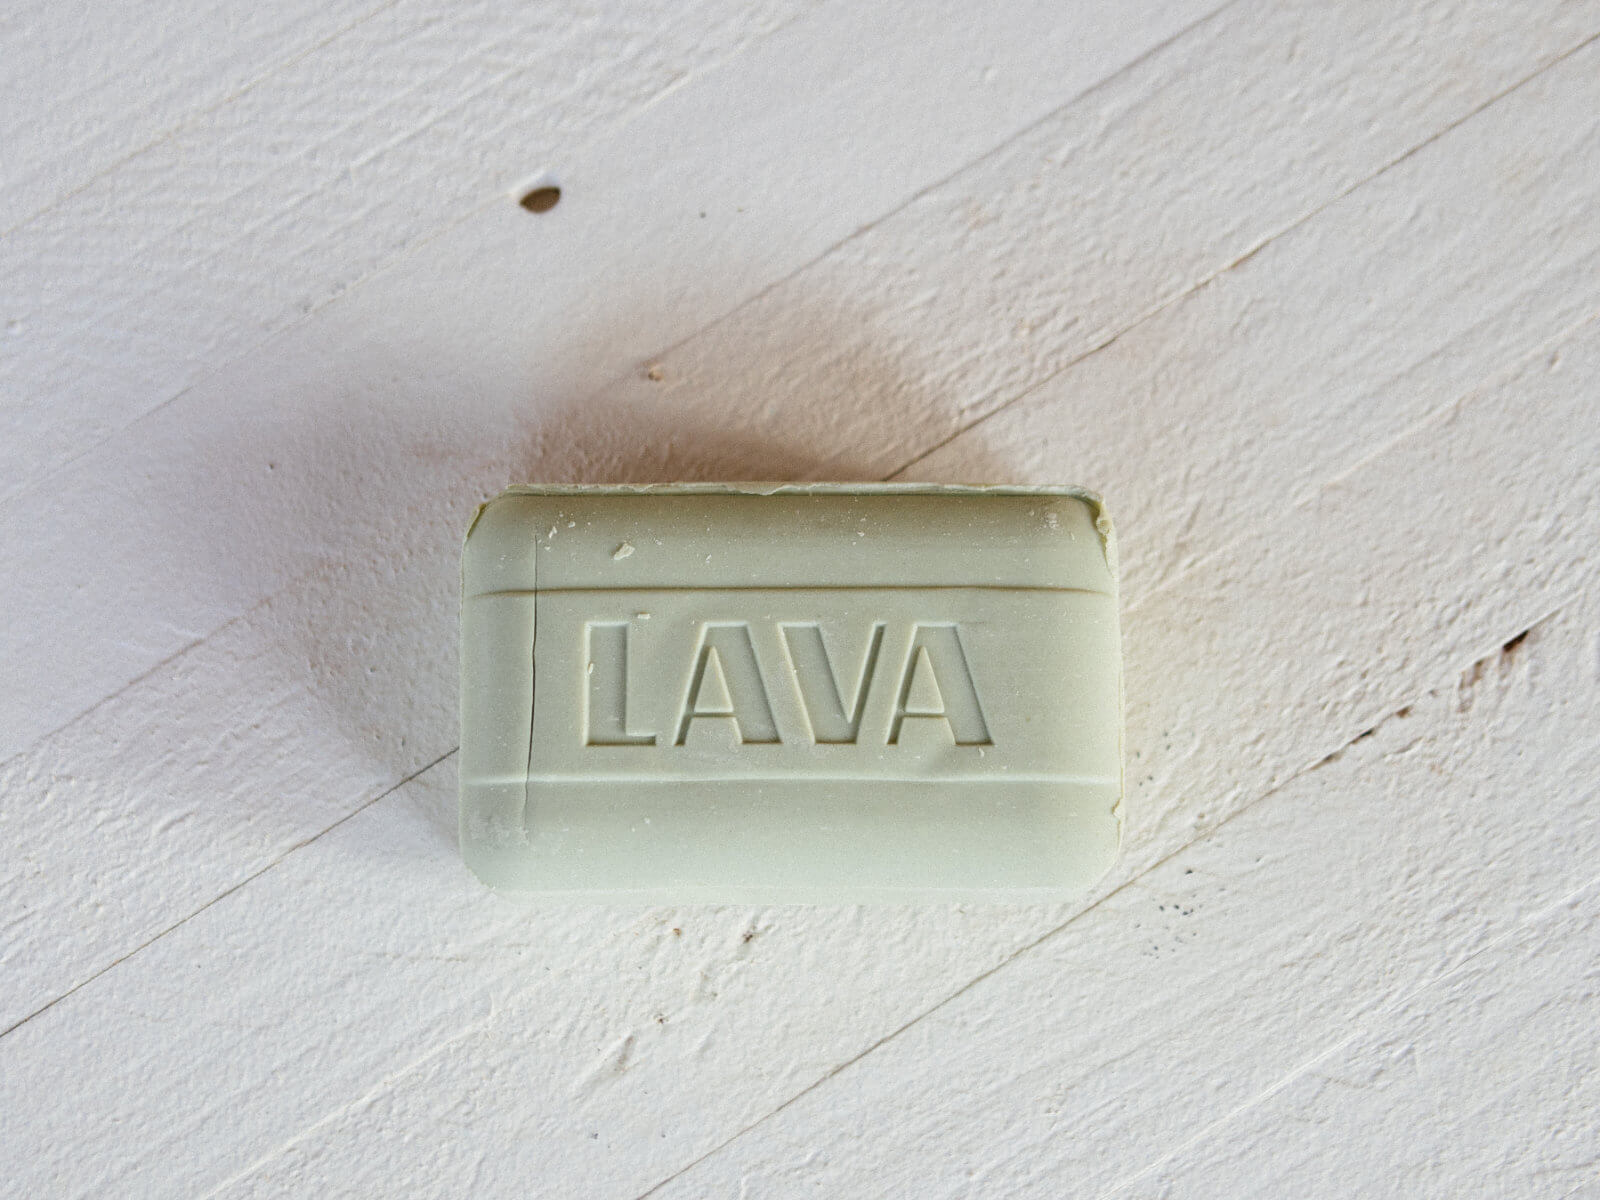 Lava Soap is a must-have gardening item